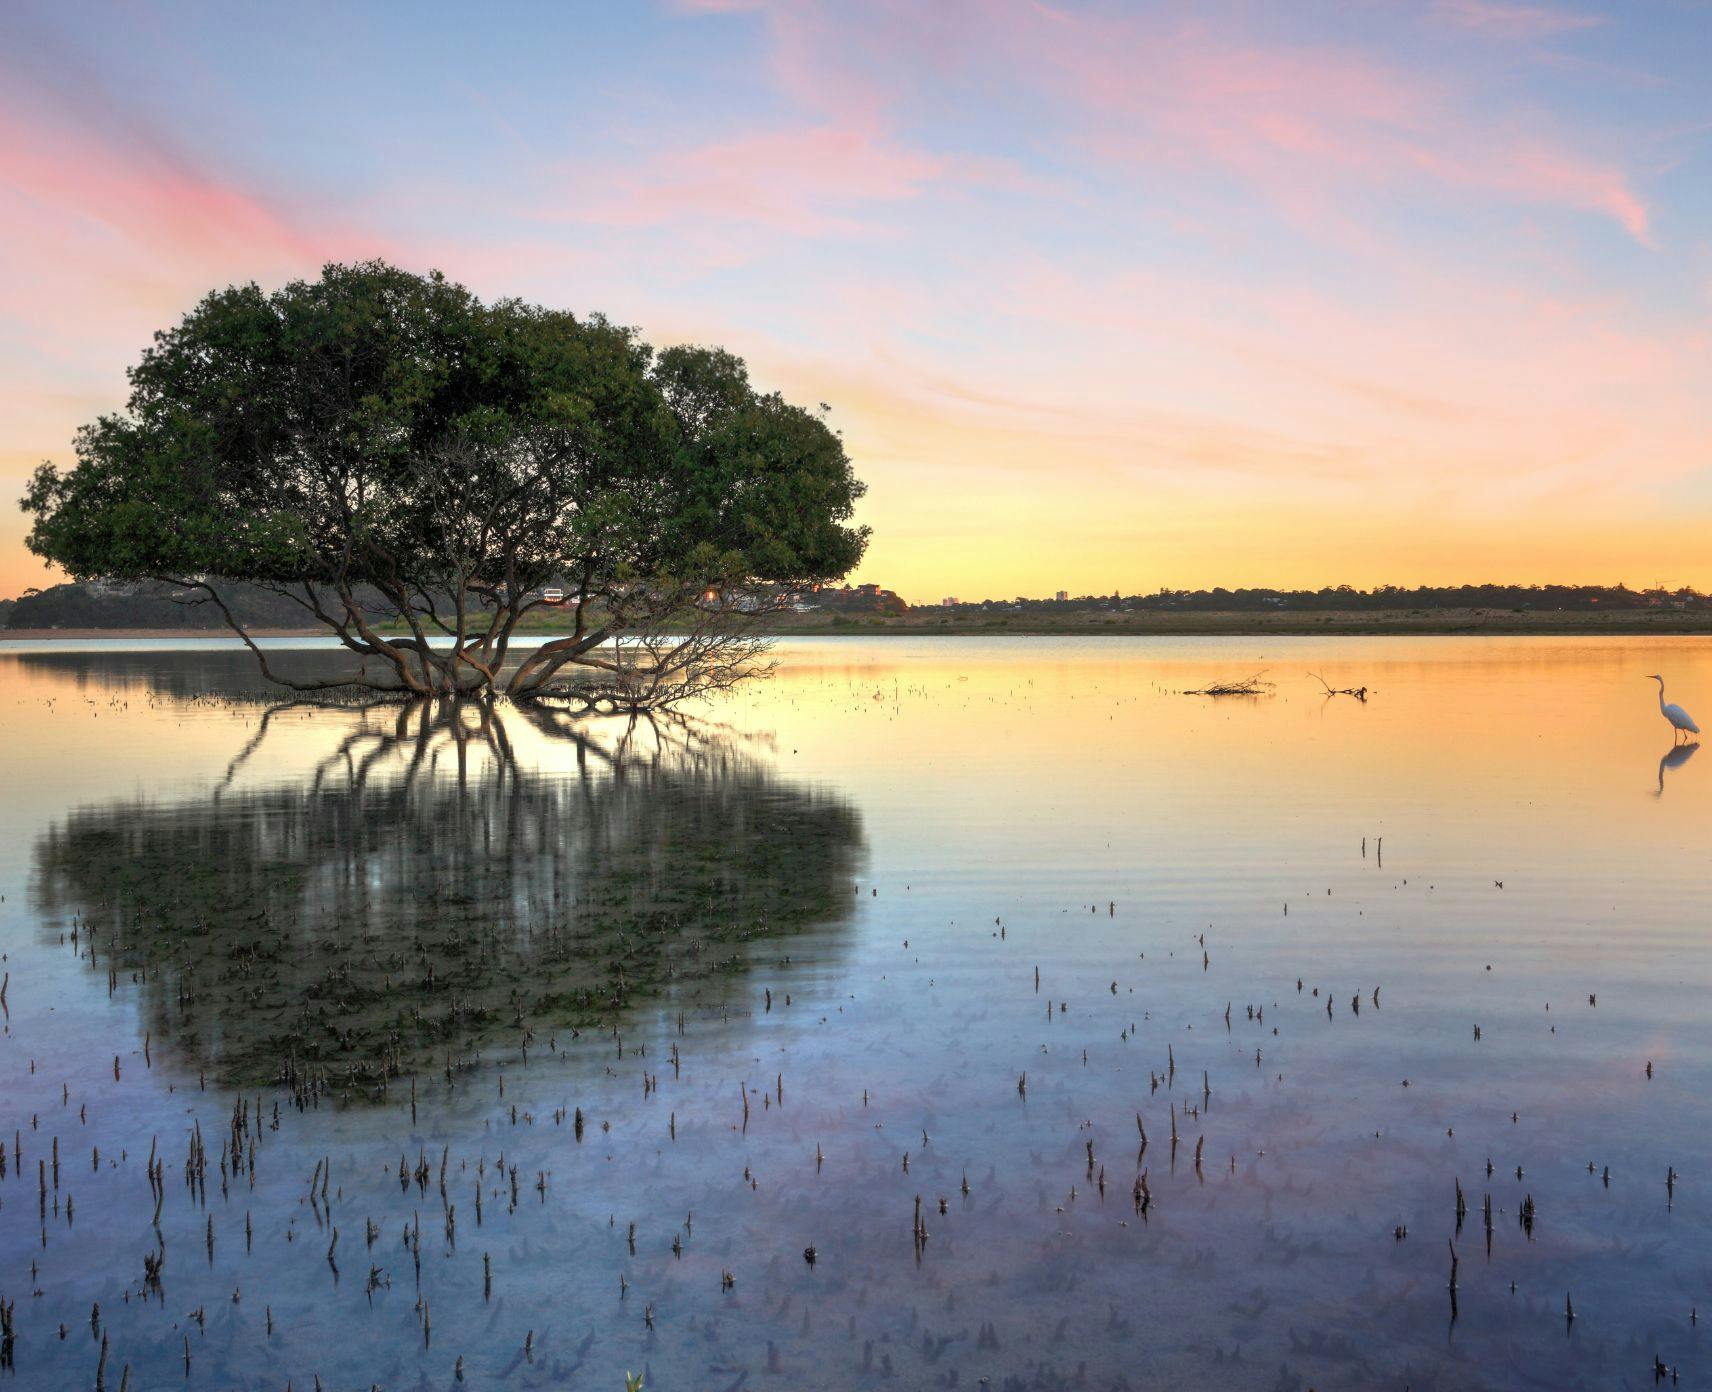 A mangrove tree and wetlands at sunrise